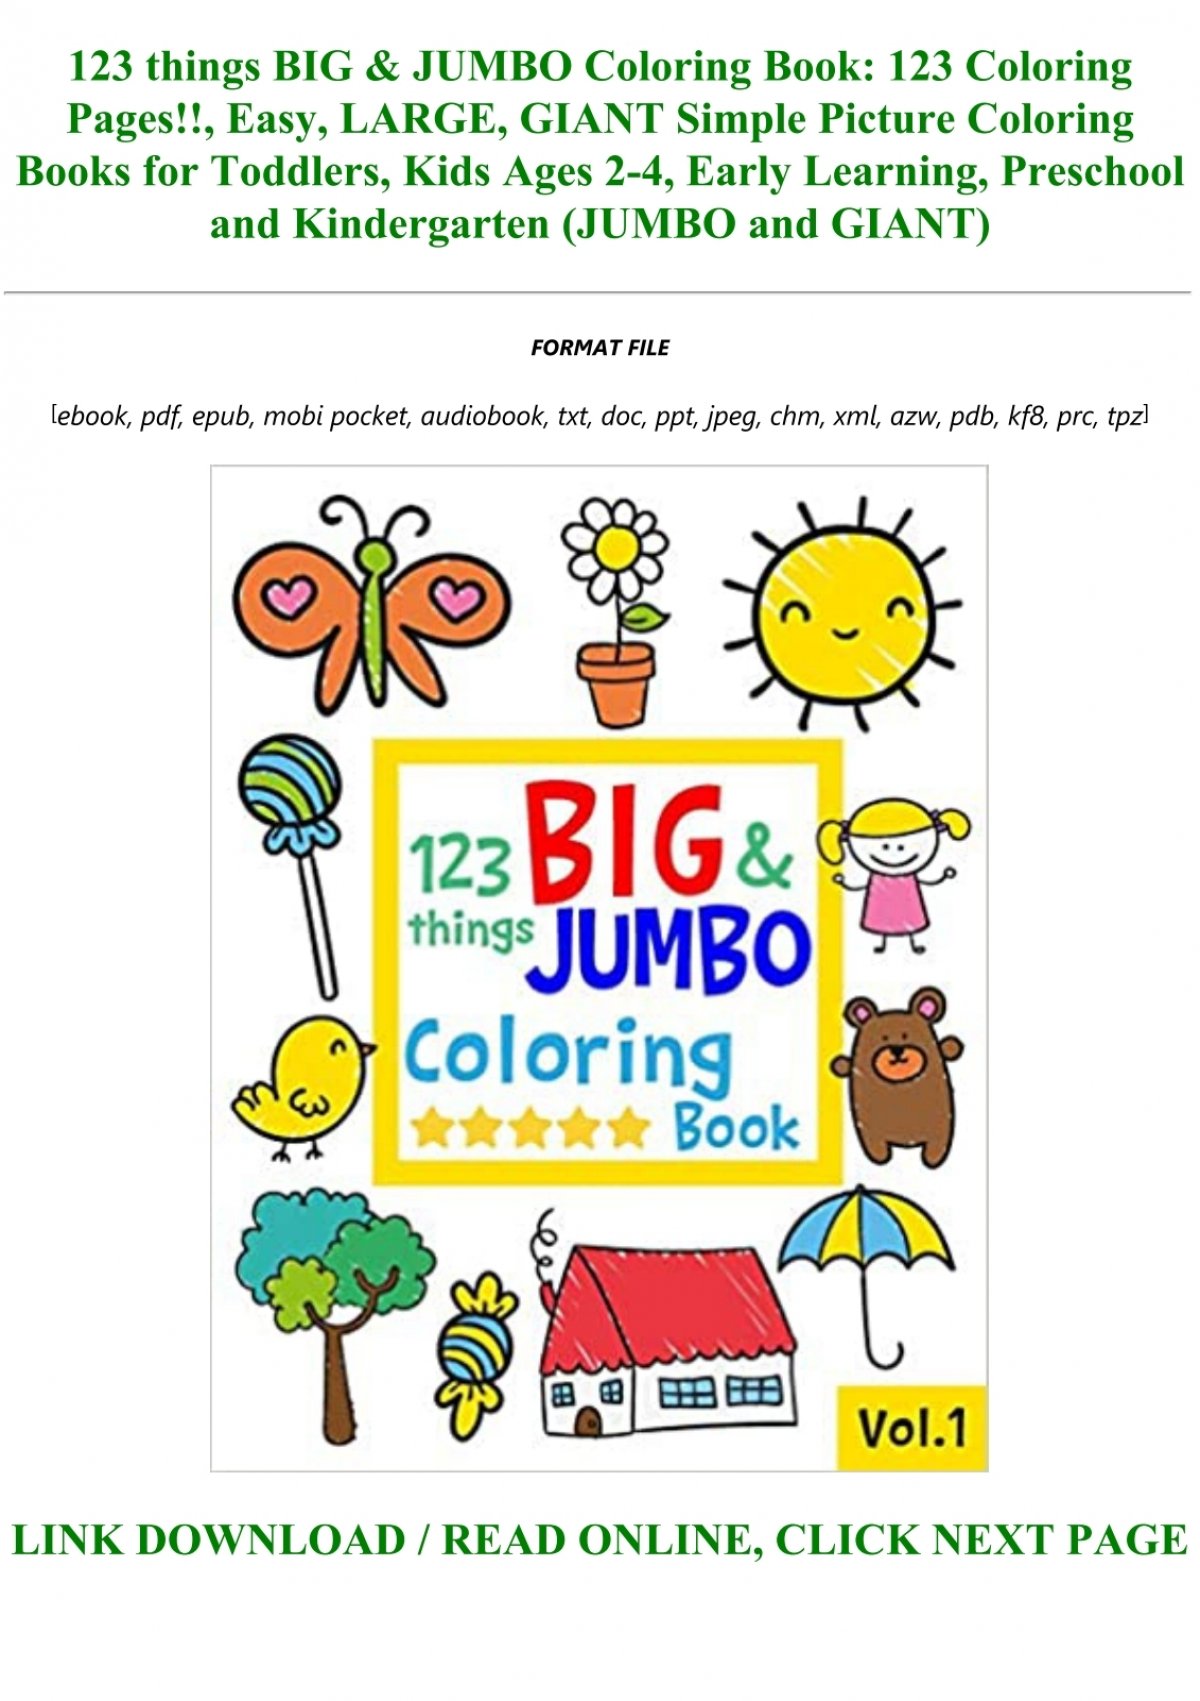 Download Ebook P D F 123 Things Big Jumbo Coloring Book 123 Coloring Pages Easy Large Giant Simple Picture Coloring Books For Toddlers Kids Ages 2 4 Early Learning Preschool And Kindergarten Jumbo And Giant Full